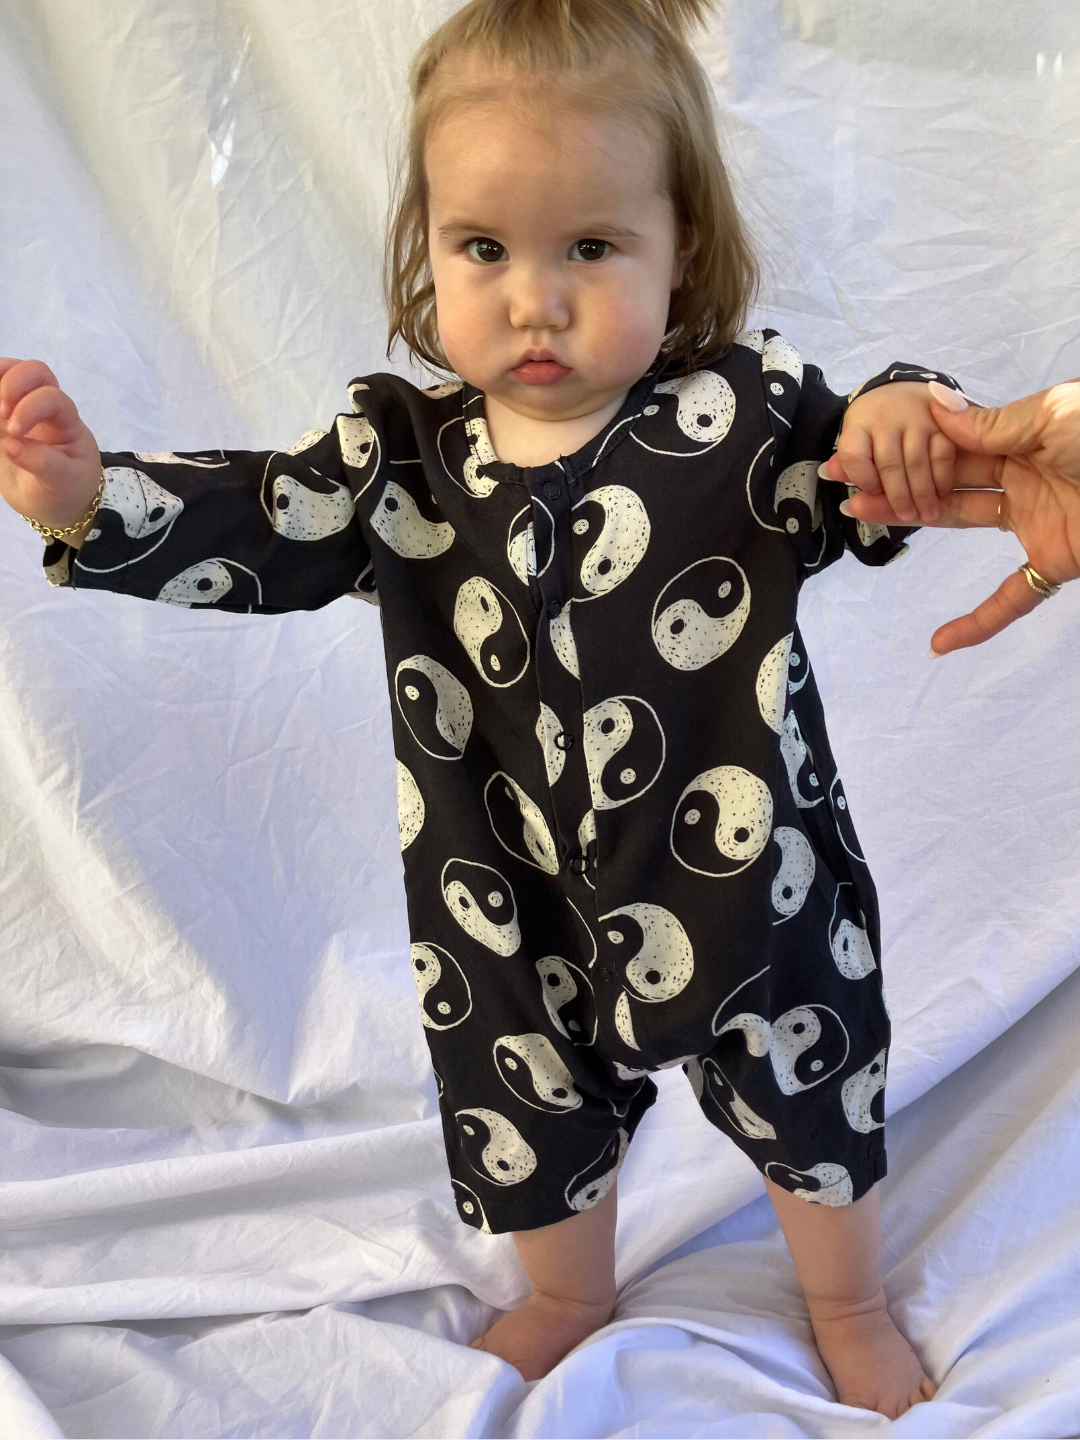 Toddler wearing the Yin Yang Baby Shortie in black cotton printed all over with white hand drawn yin yangs. She is standing holding an adult's hand, on a white sheet backdrop.